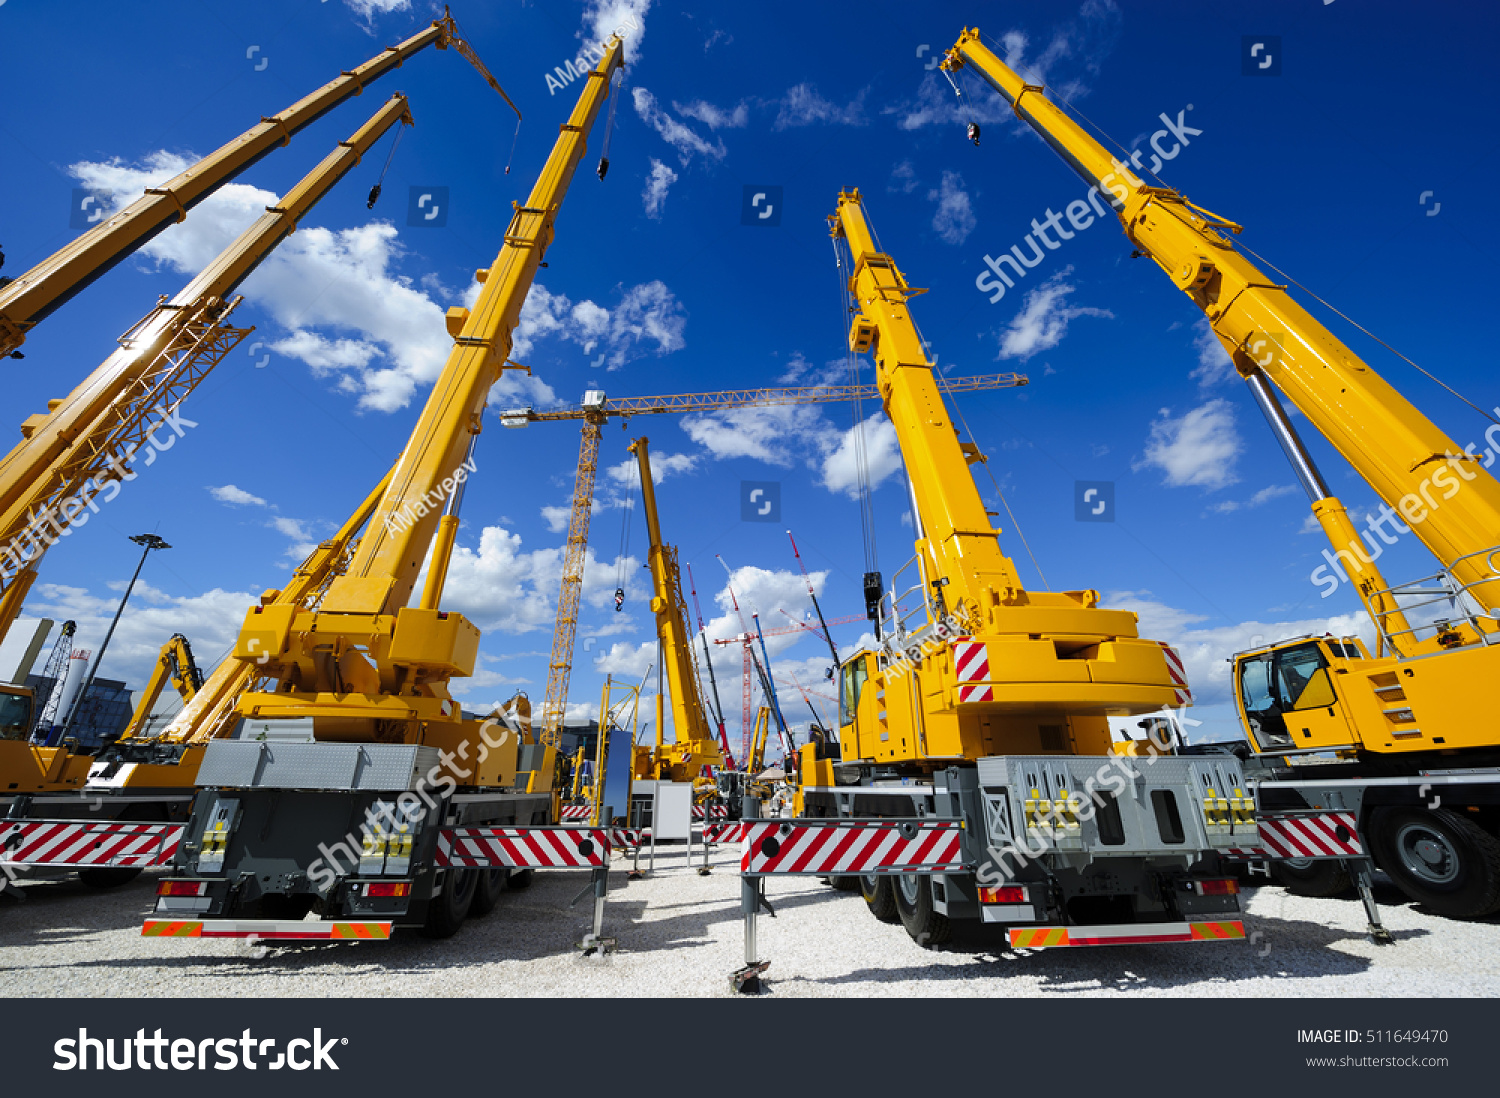 Mobile construction cranes with yellow telescopic arms and big tower cranes in sunny day with white clouds and deep blue sky on background, heavy industry  #511649470